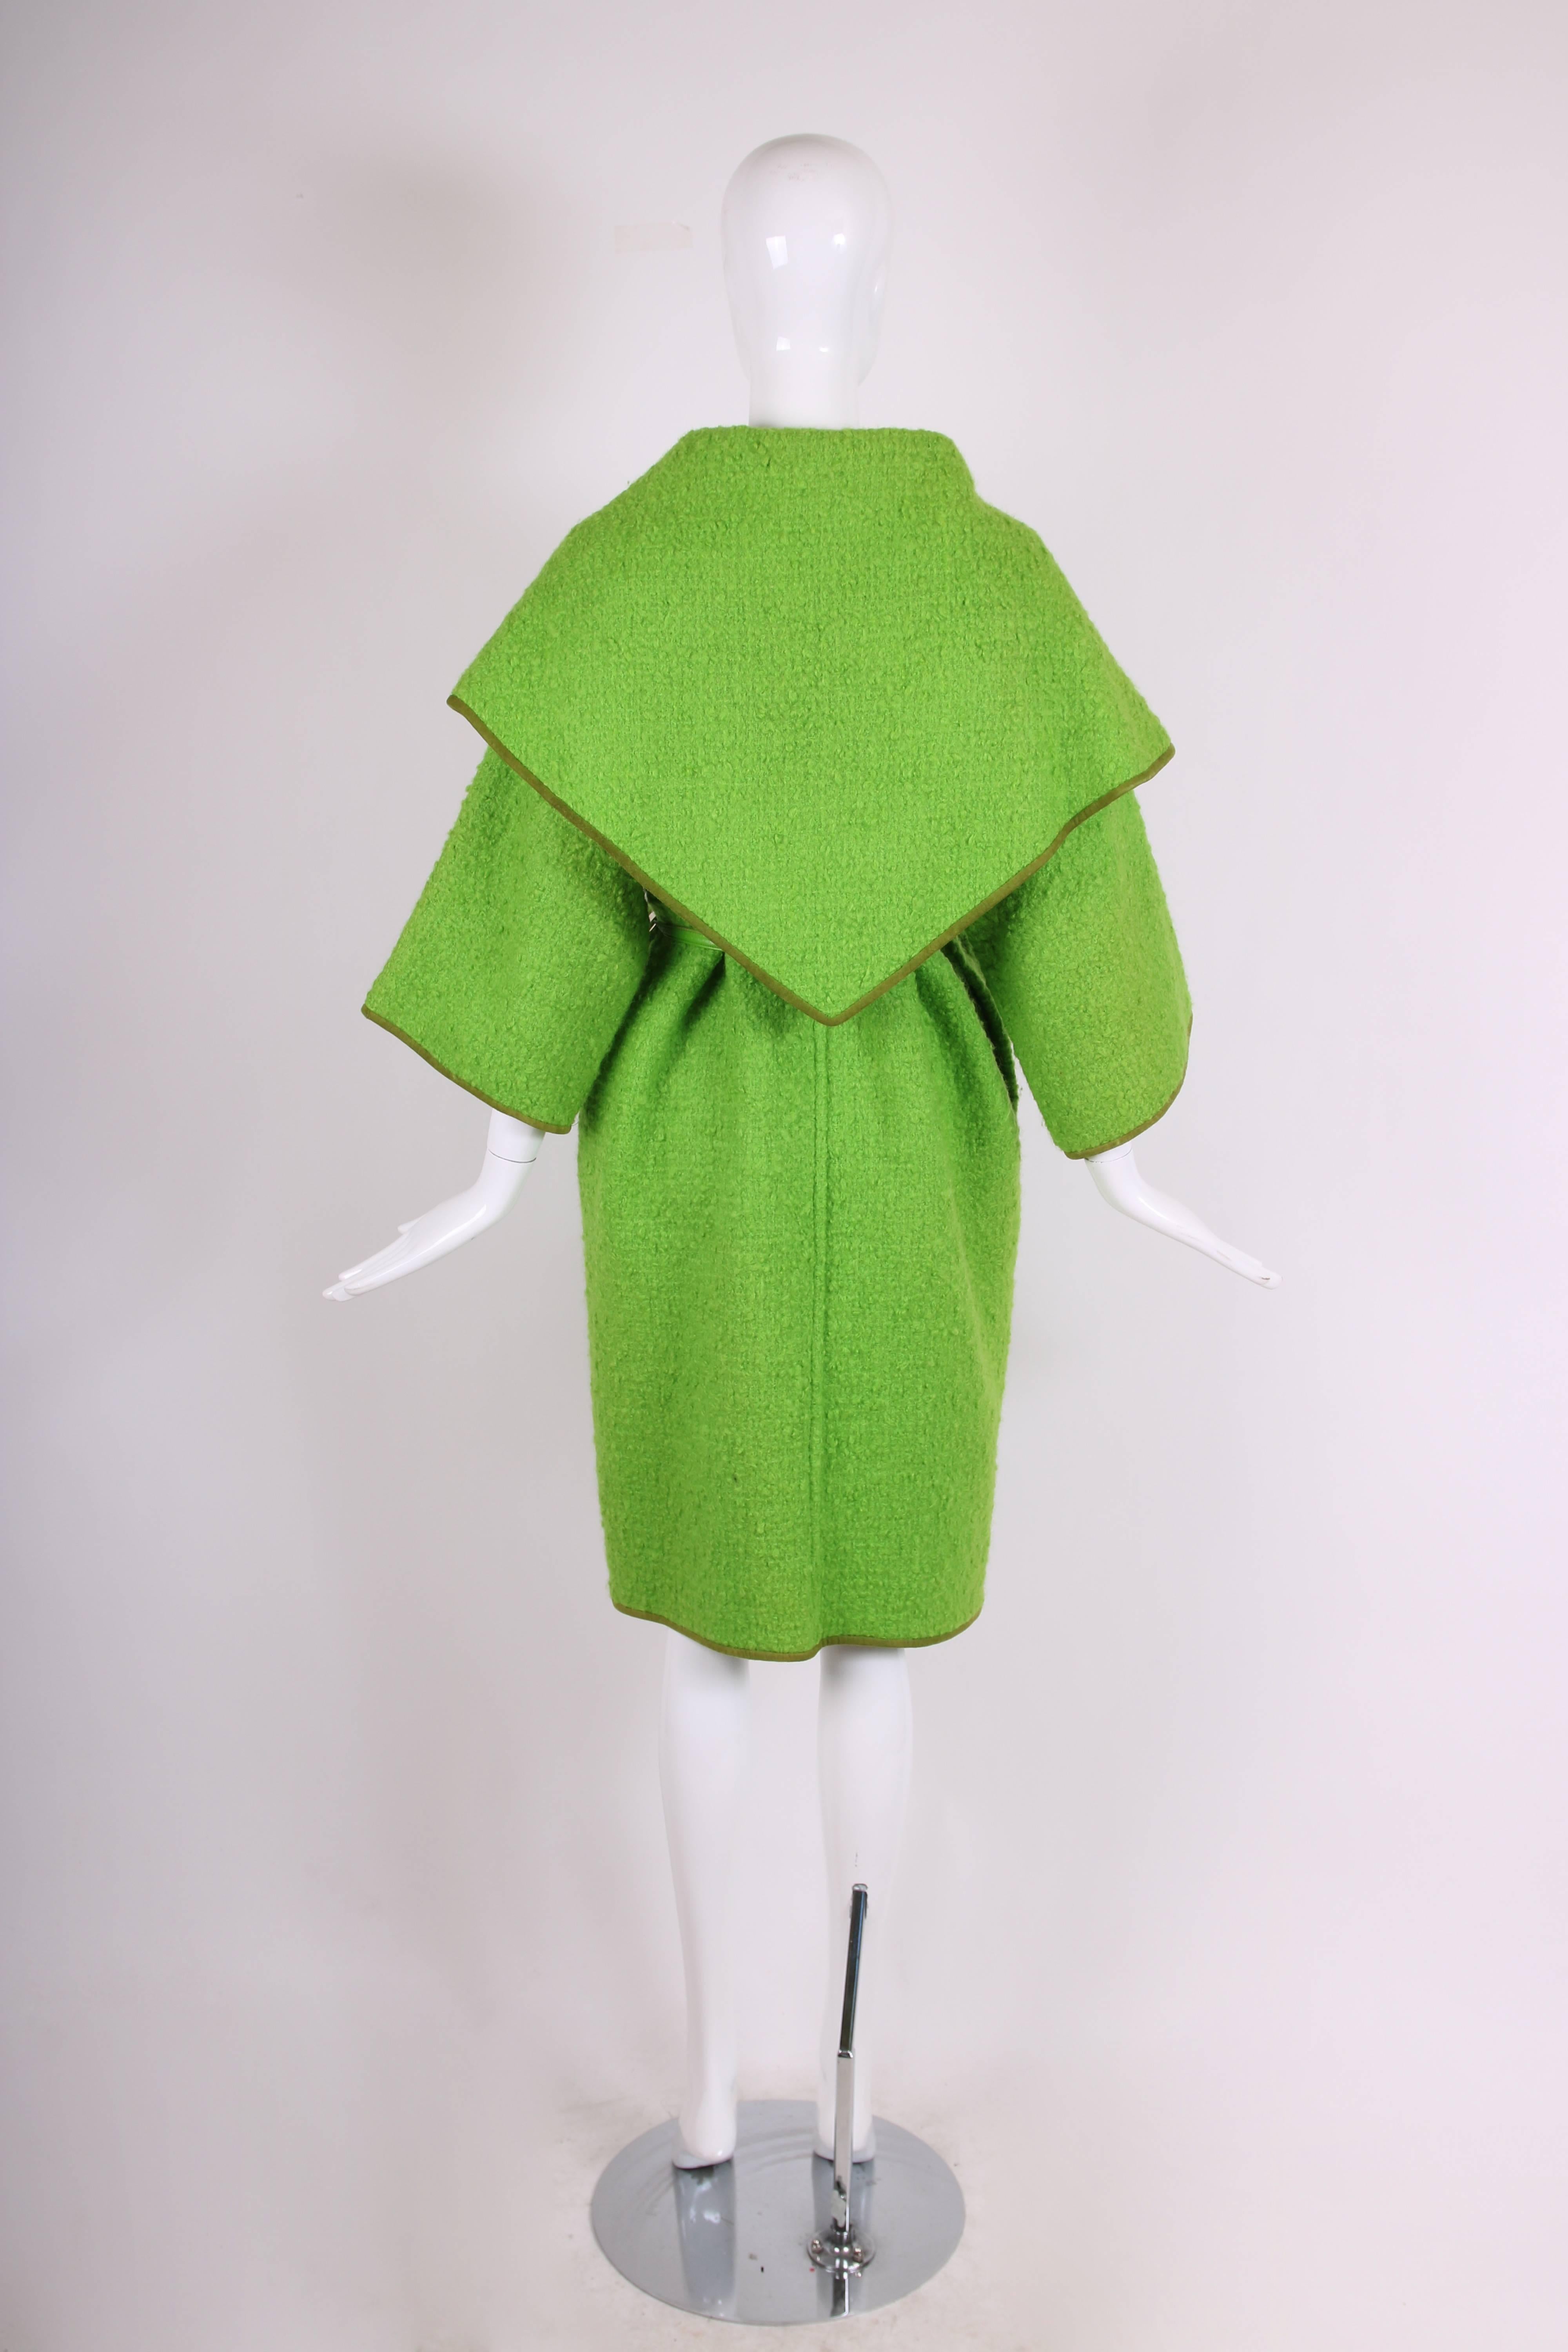 Bonnie Cashin for Sills Lime Green Boucle Wool Coat circa 1960s In Excellent Condition In Studio City, CA